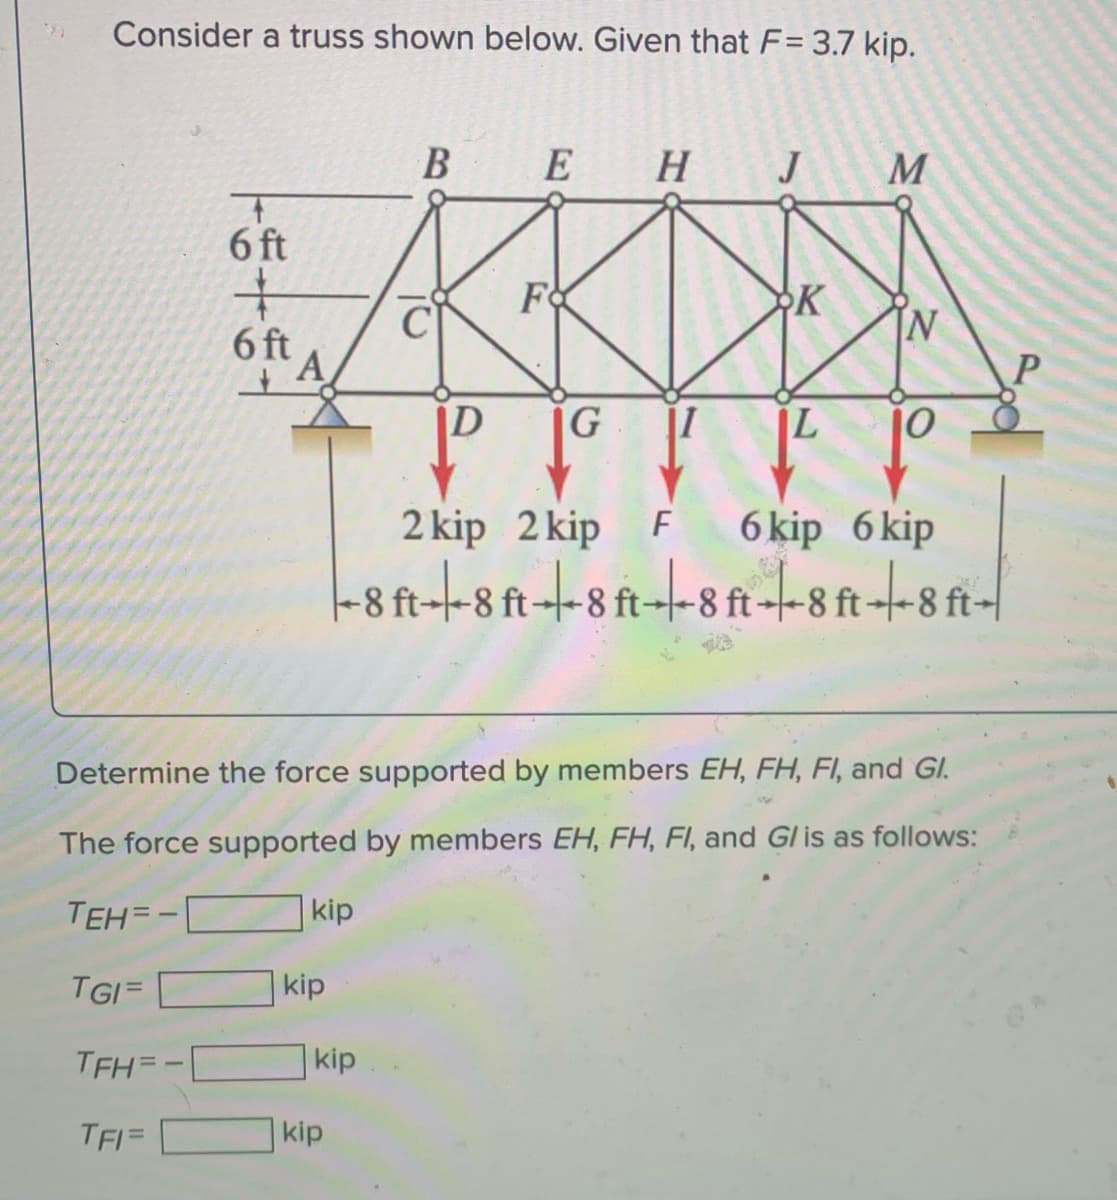 Consider a truss shown below. Given that F= 3.7 kip.
E
H
M
6 ft
Fo
K
[N
6 ft
D
G I
2 kip 2 kip F
6 kip 6 kip
-8 ft--8 ft--8 ft--8 ft-|
Determine the force supported by members EH, FH, FI, and GI.
The force supported by members EH, FH, FI, and Gl is as follows:
TEH=-
kip
TGI=
kip
TFH=-
kip
TFI=
kip
